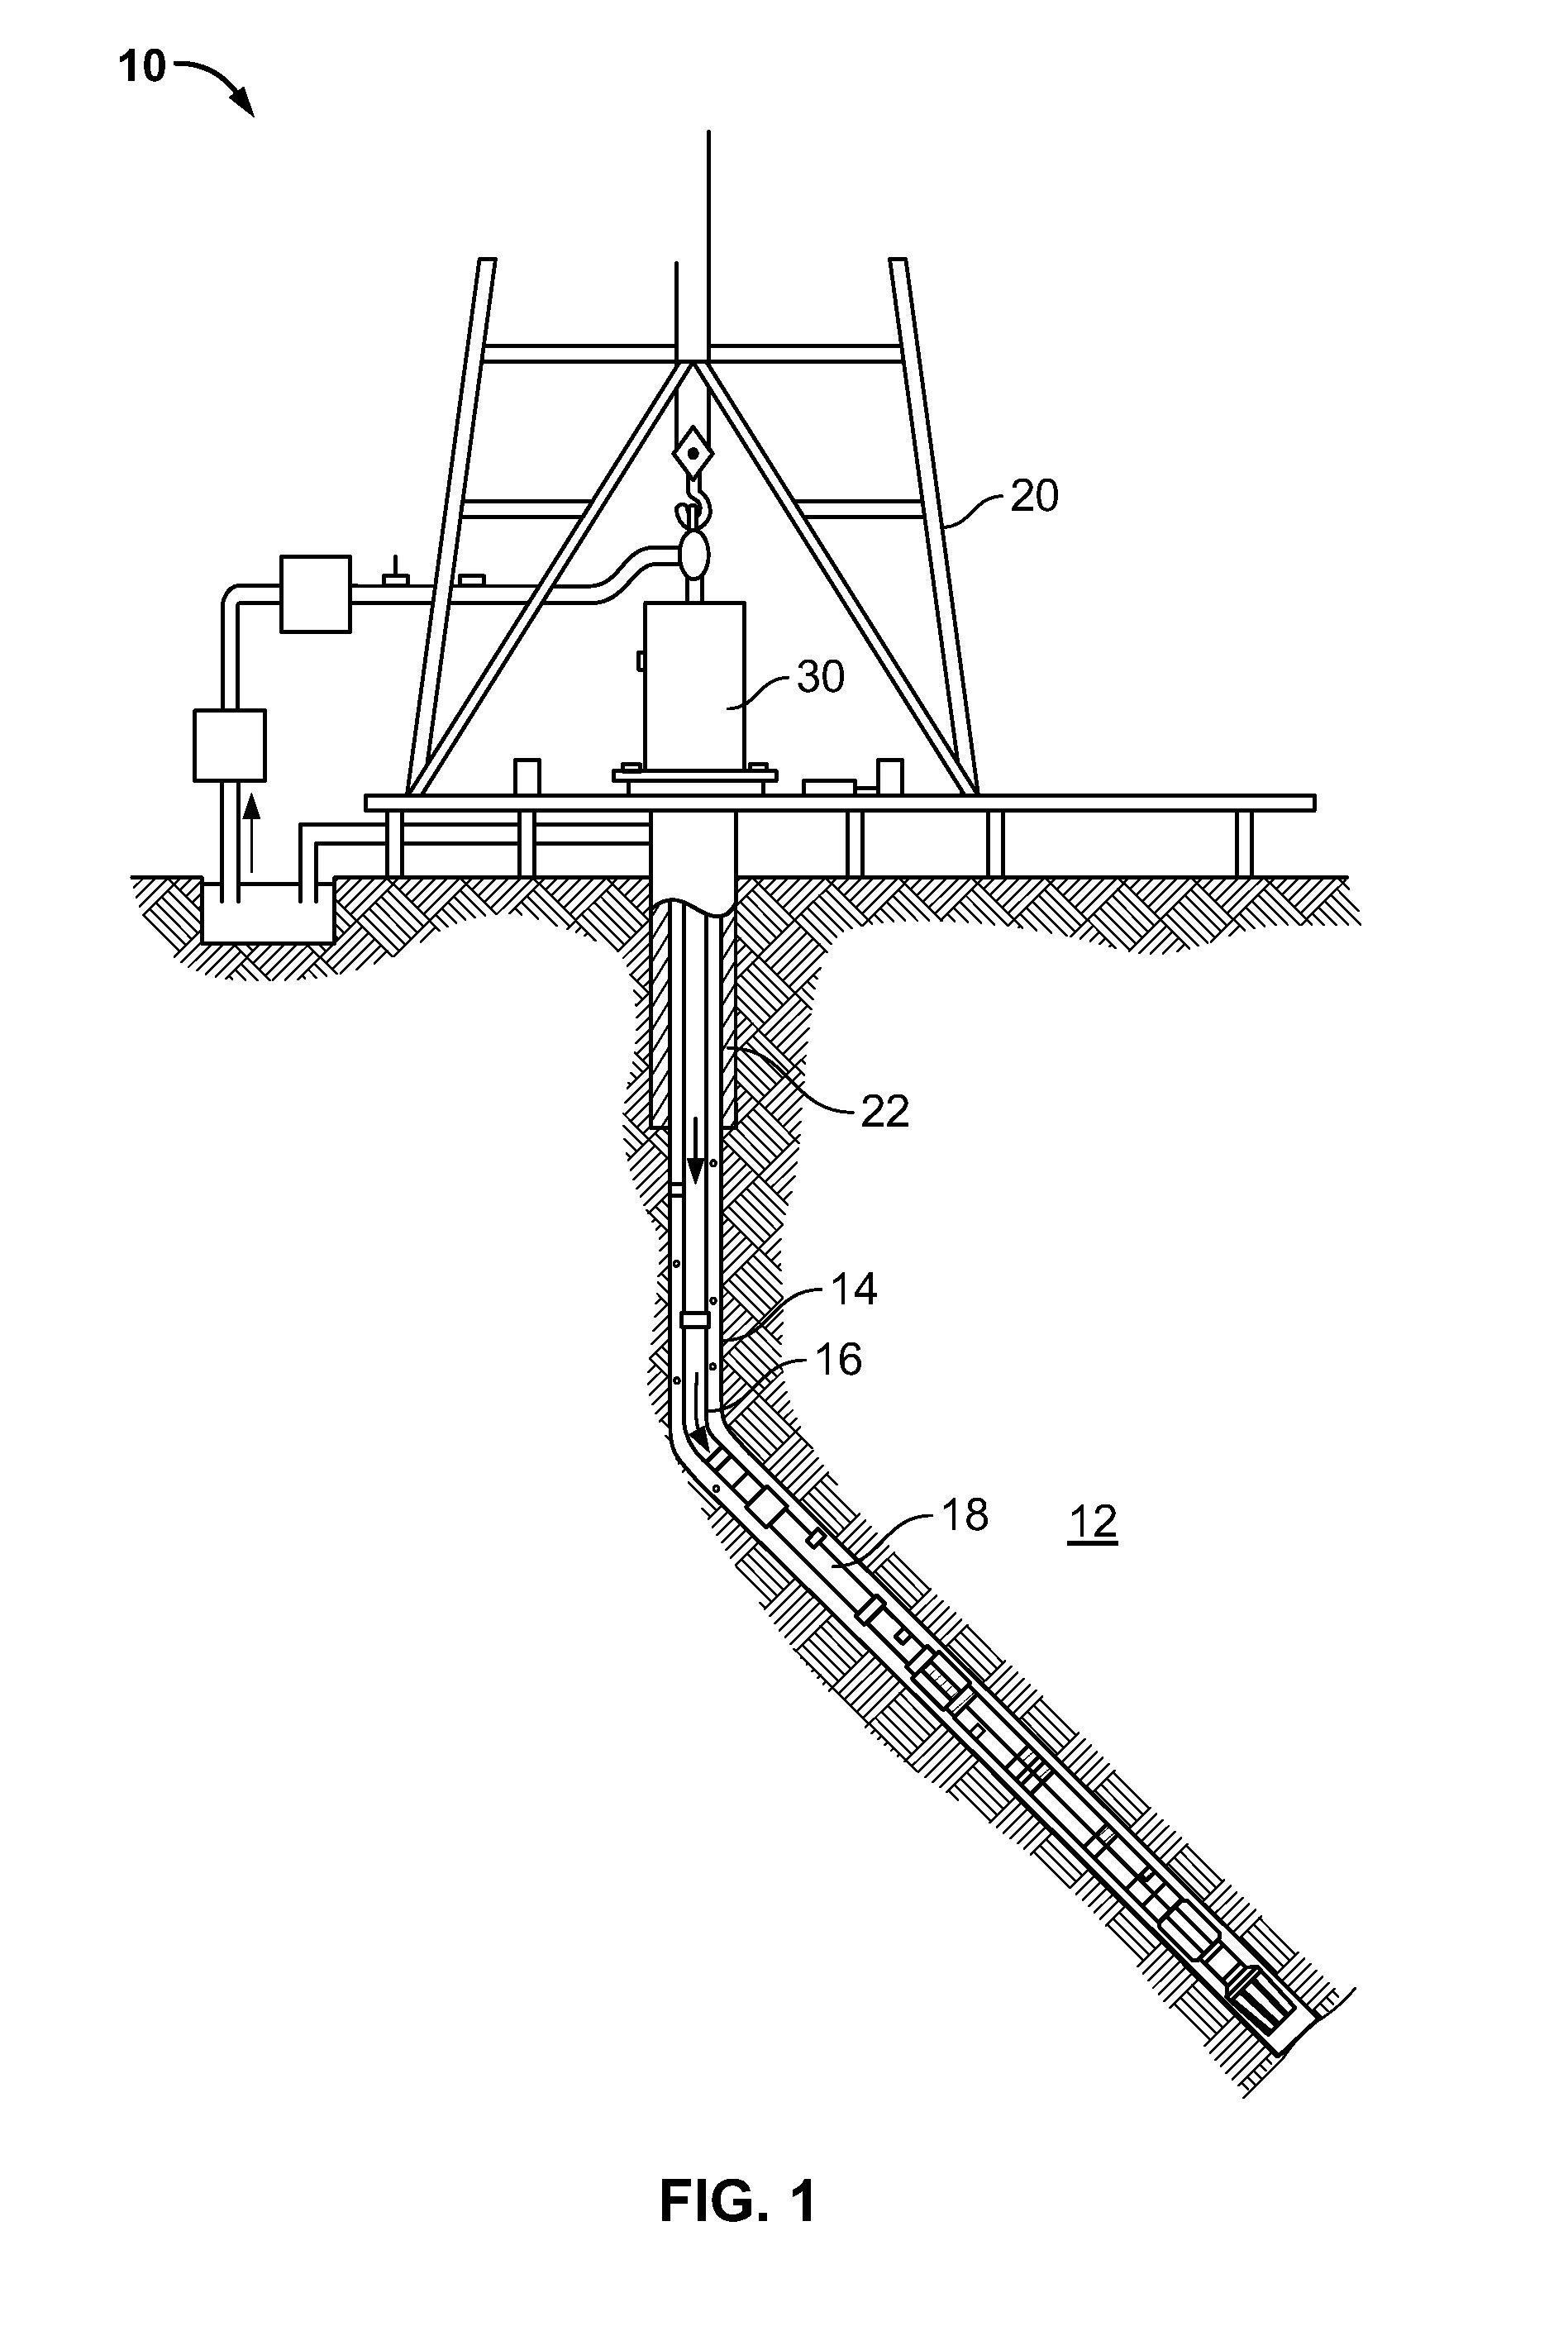 Enhanced Arc Control for Magnetically Impelled Butt Welding